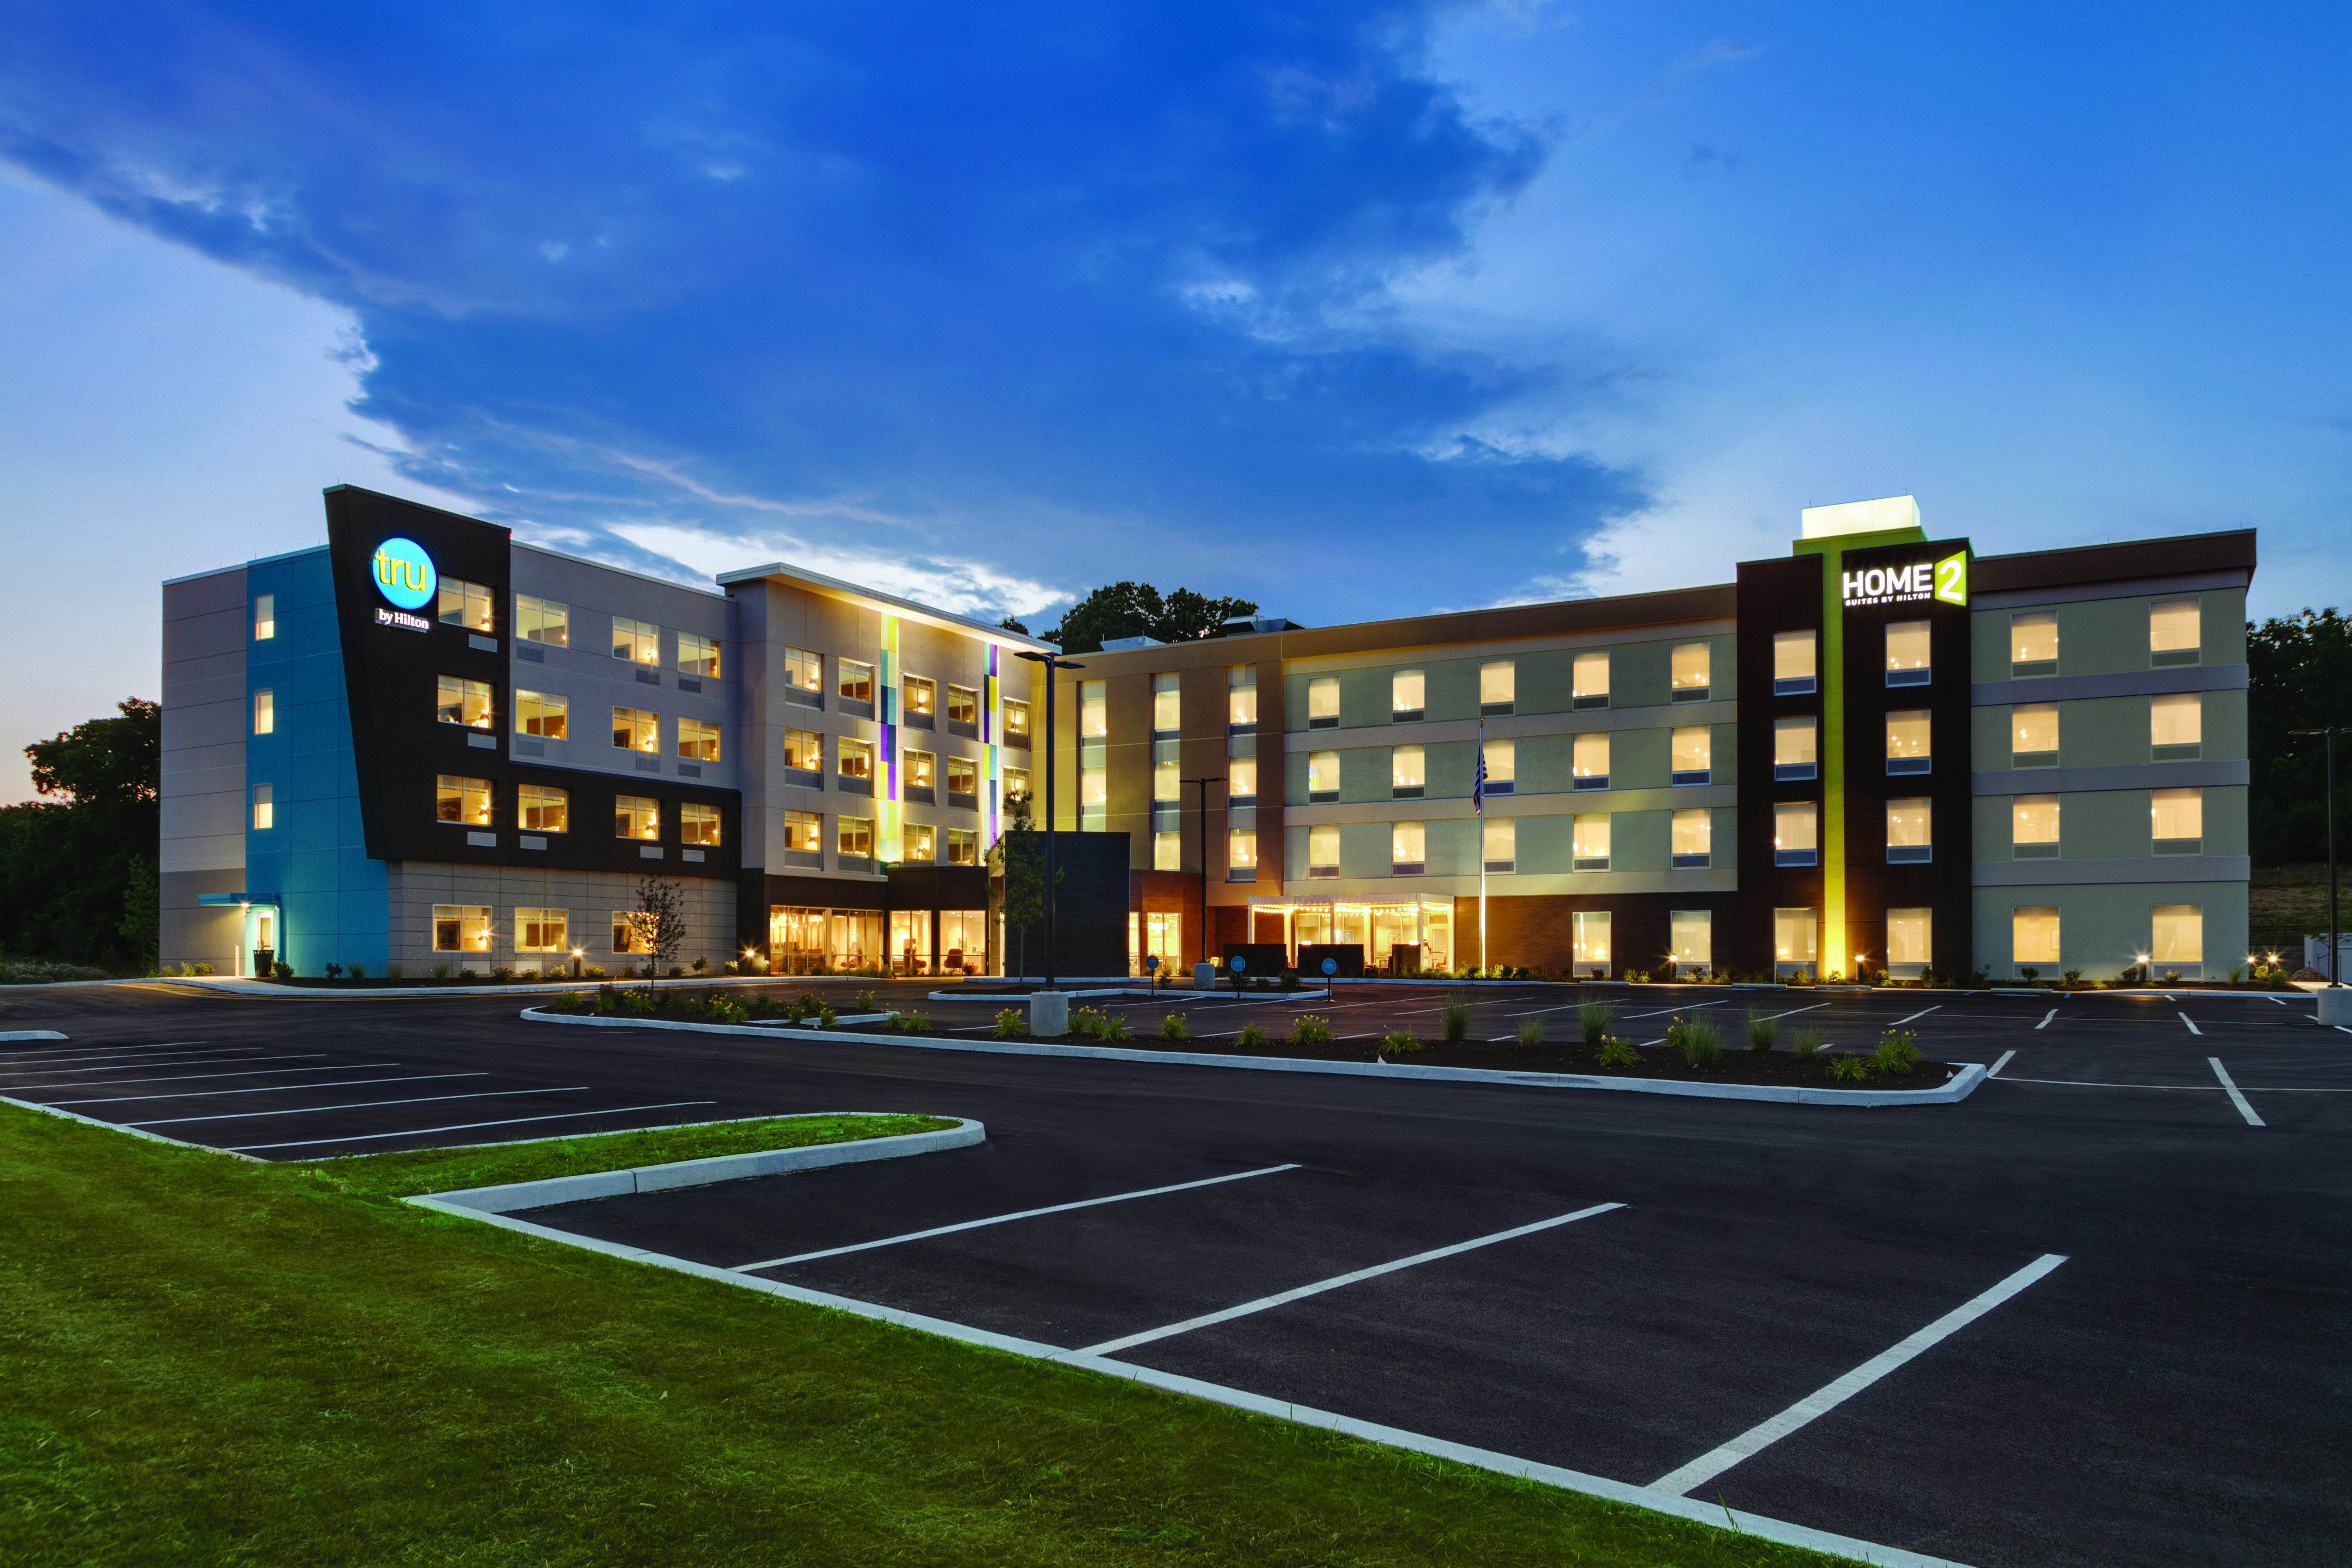 New Easton Dual Branded Hotels